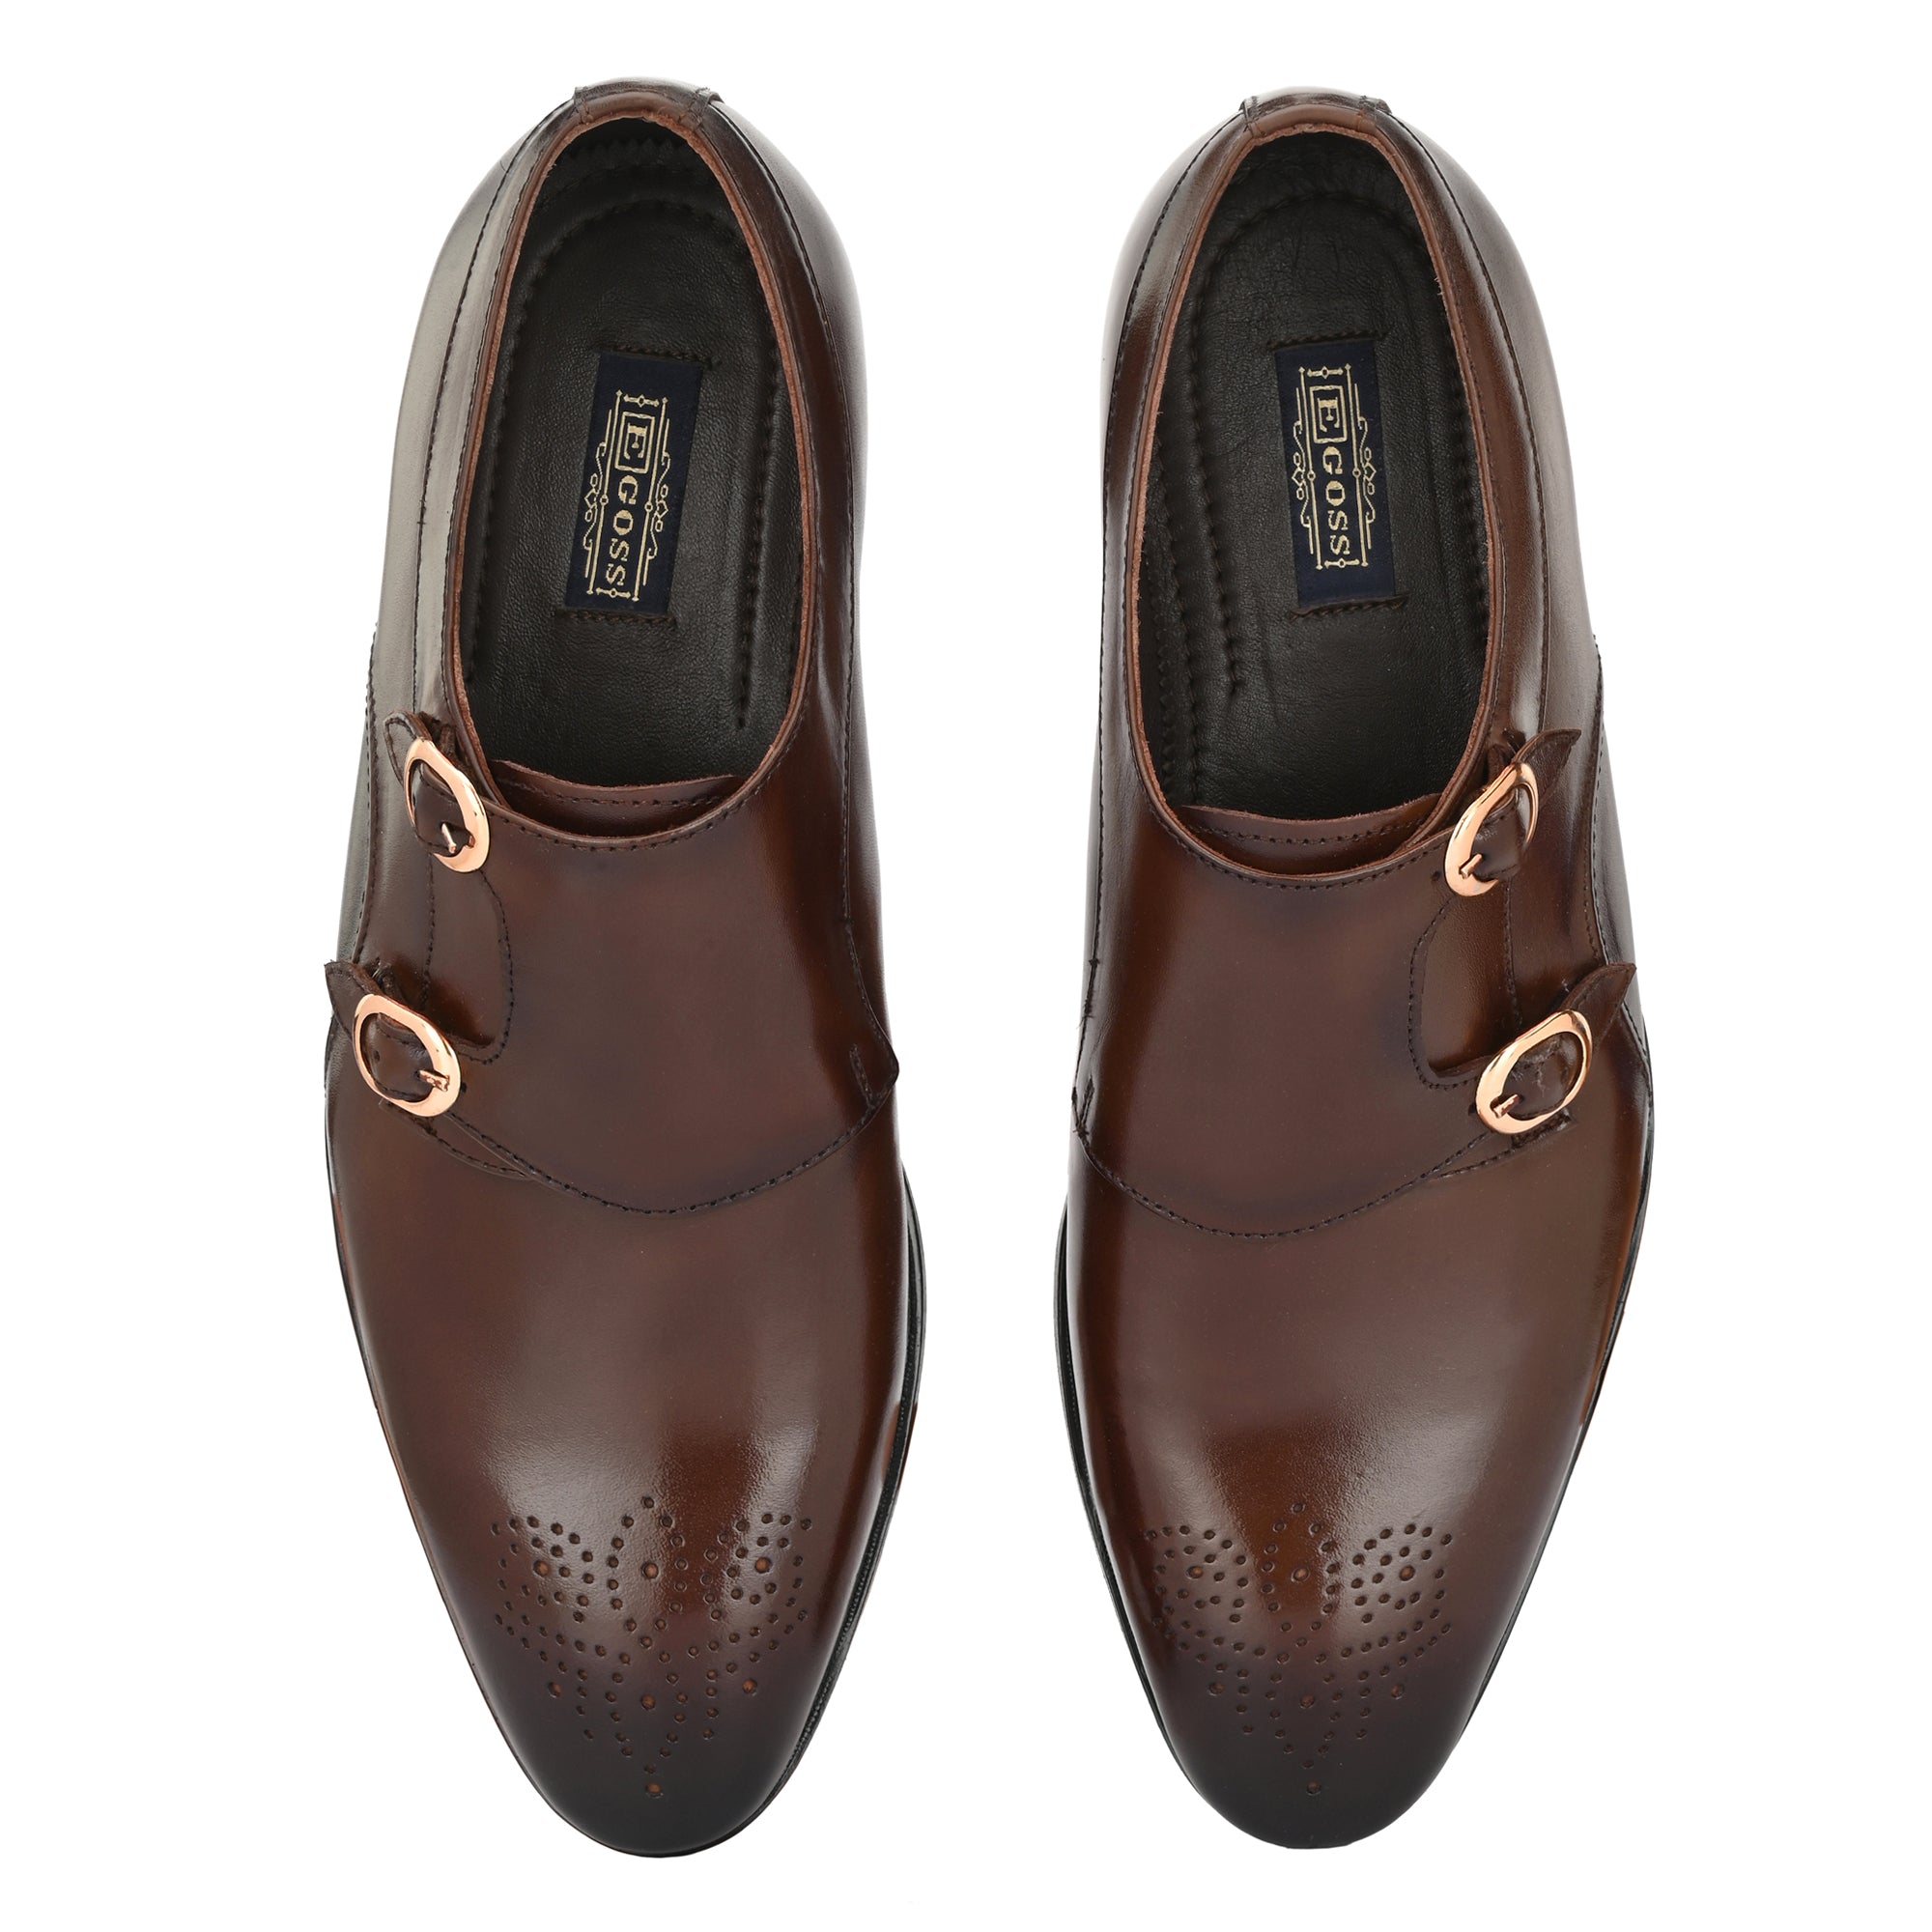 Formal Leather Buckled Shoes For Men